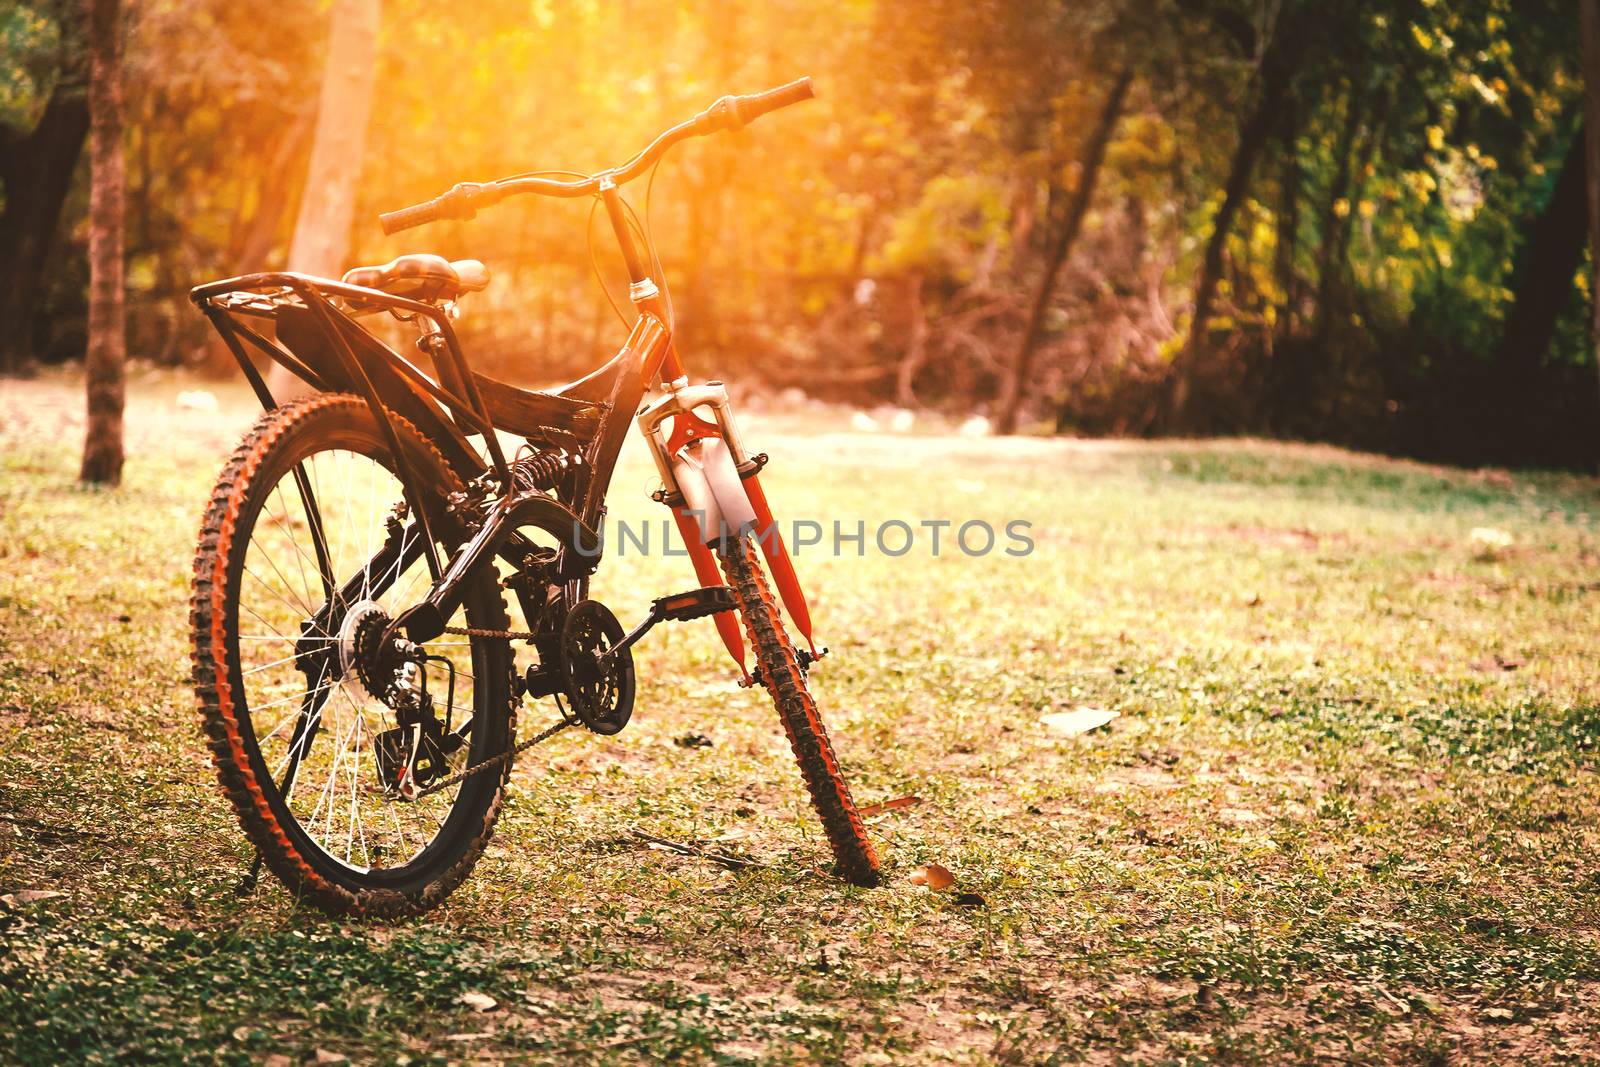 A red and black mountain bicycle standing in a field with morning sun.